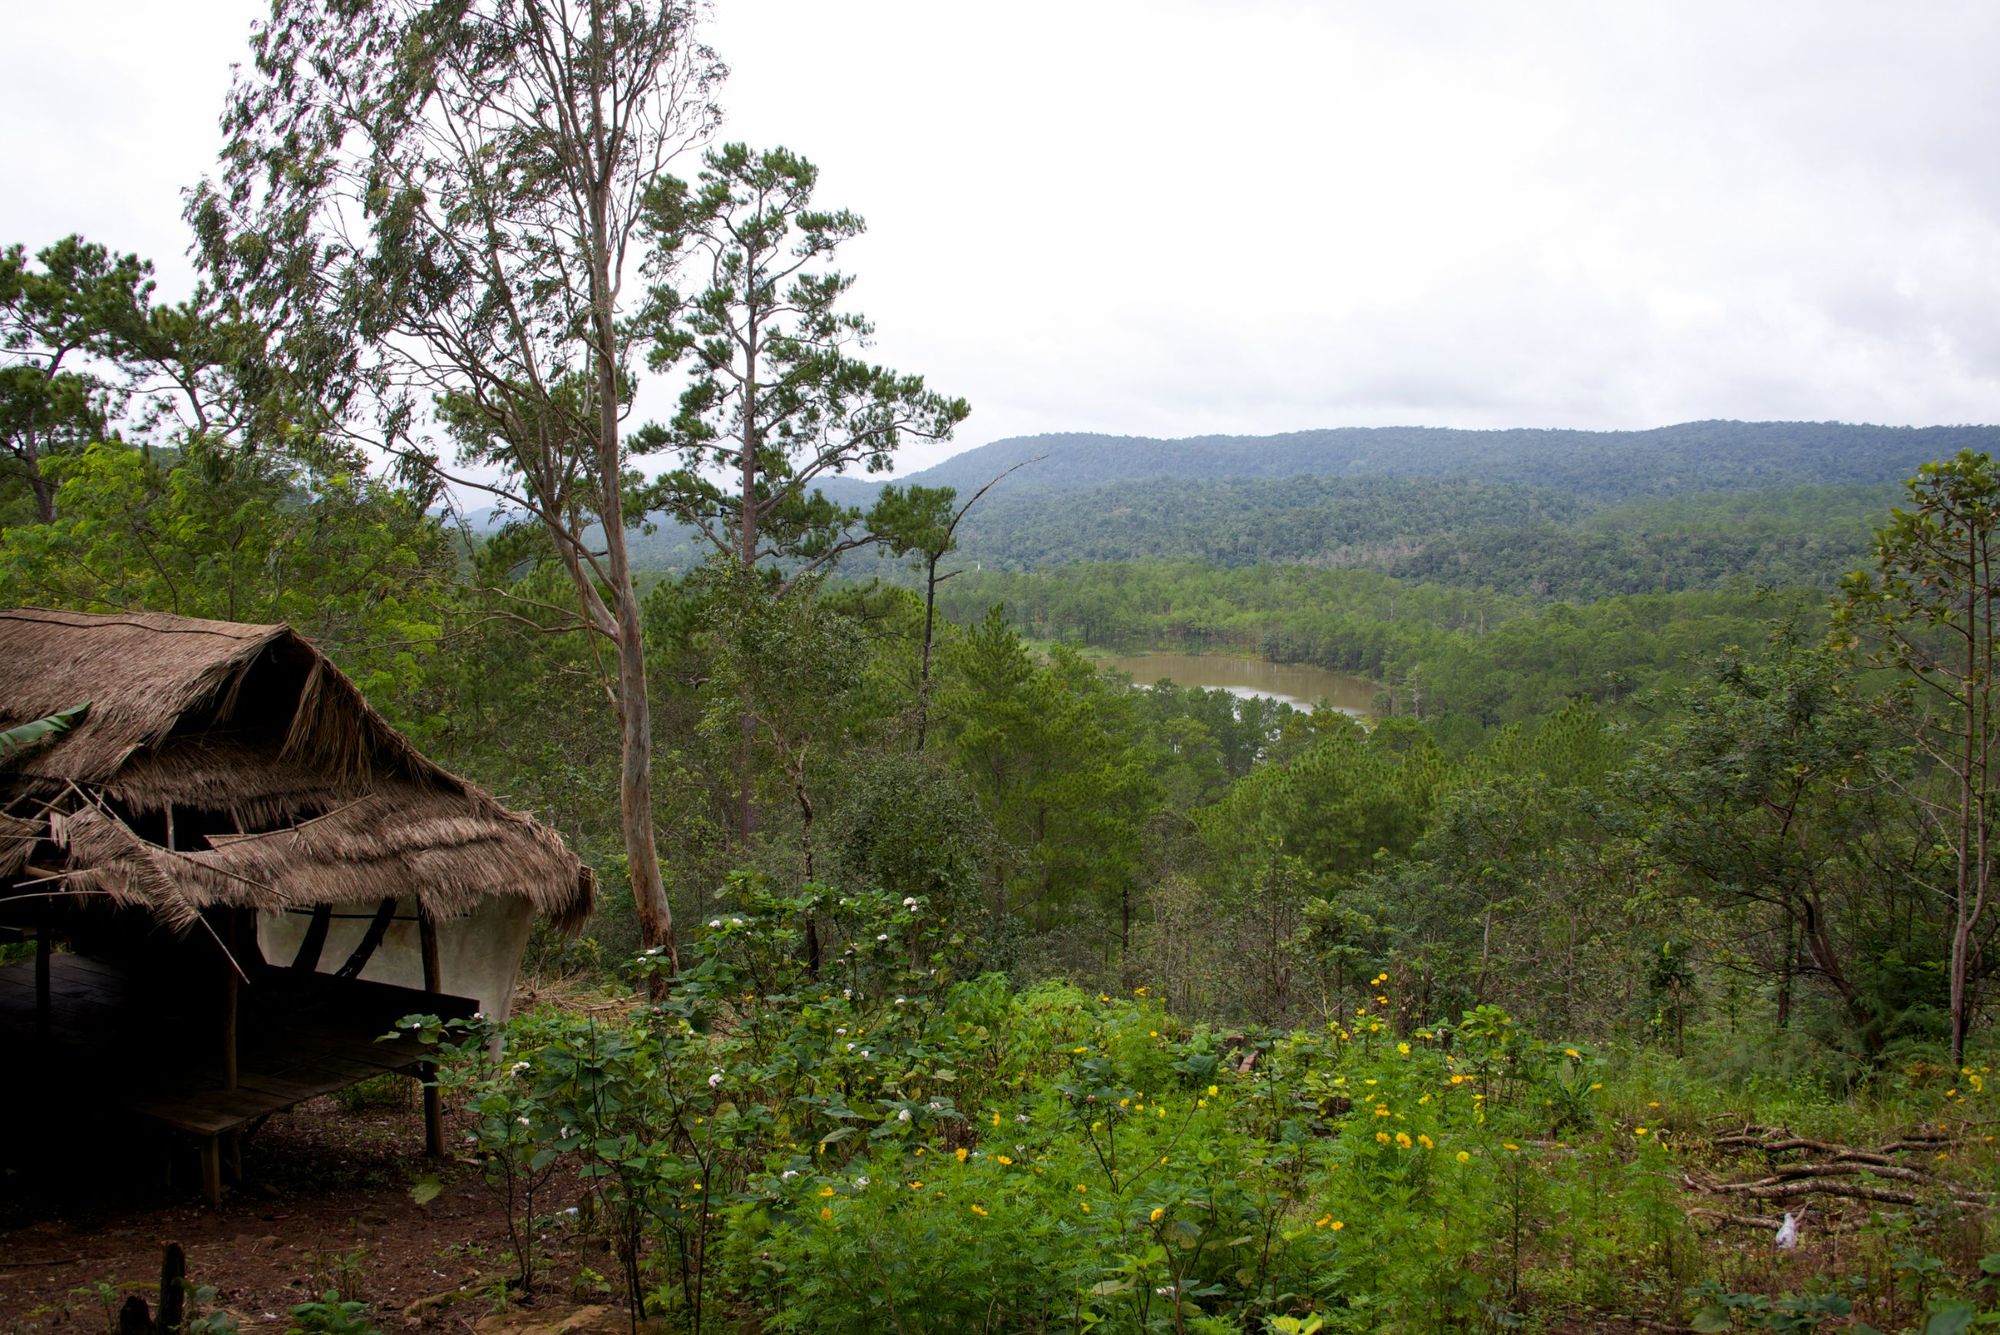 A far-reaching view of the forests on Kirirom Mountain in Cambodia. Photo: Getty